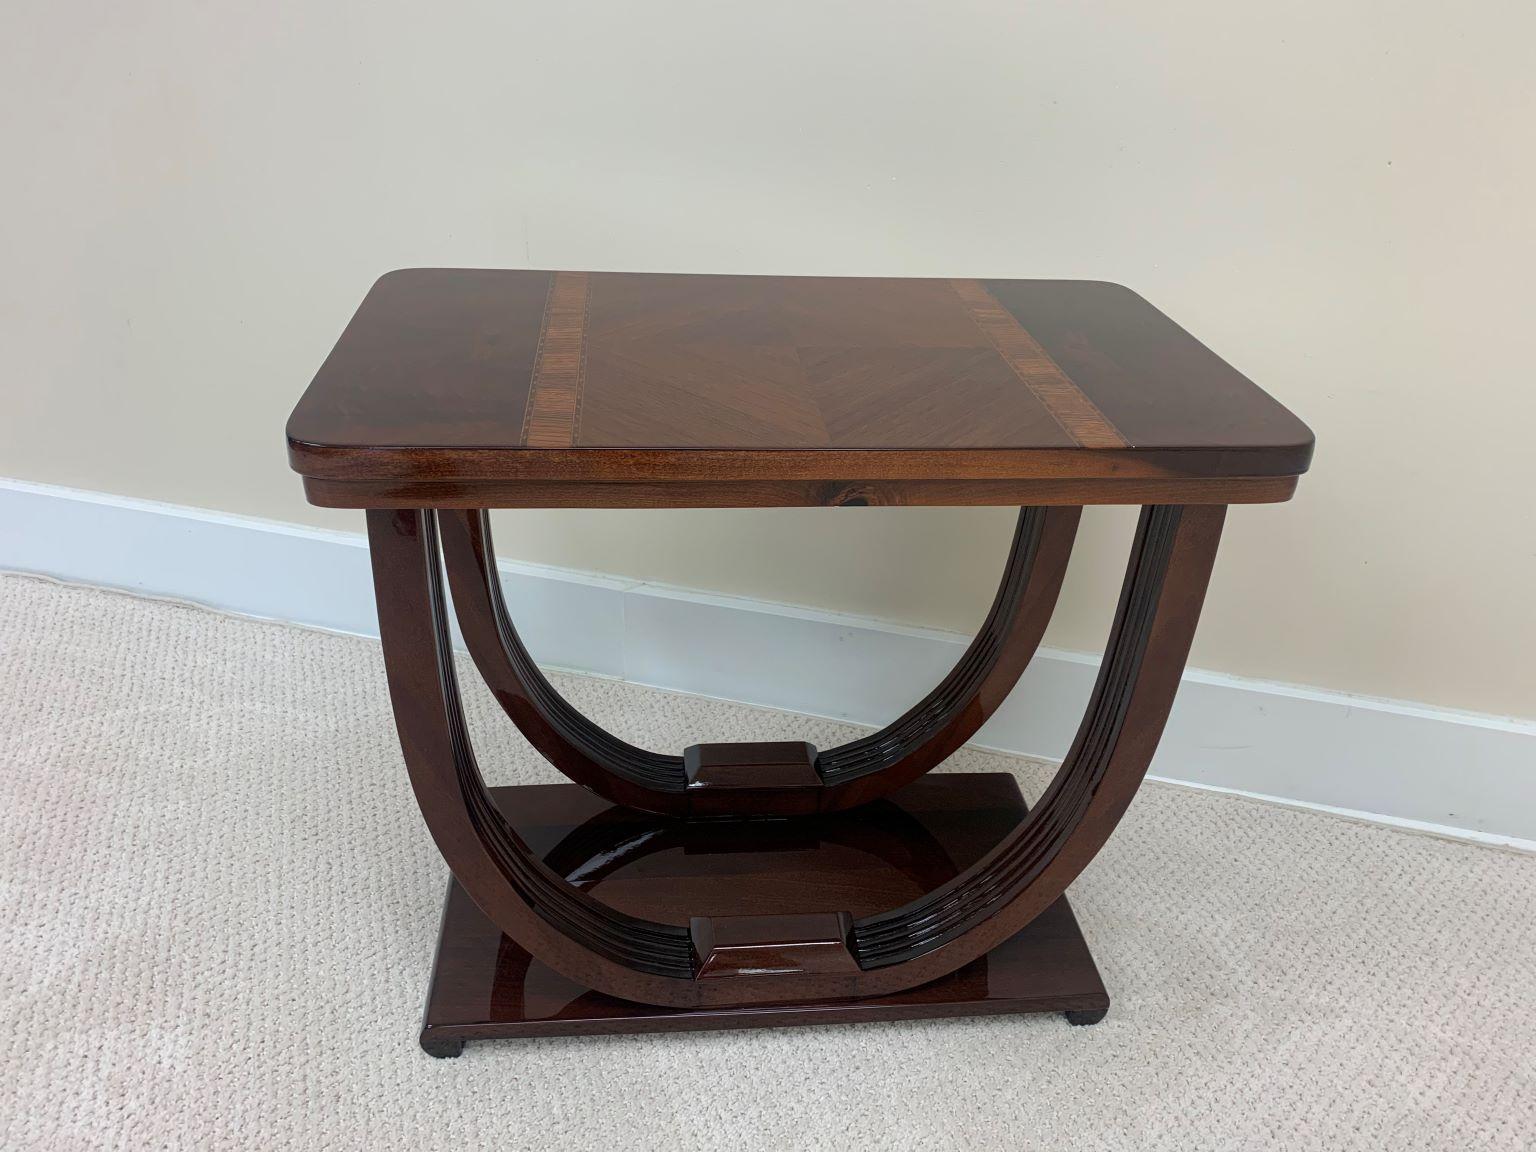 Extraordinarily beautiful Art Deco end table. The top inlays consist of burl walnut and zebrawood / walnut. The top is supported by an elegantly curving streamline base. Restored to mint condition. Dimensions: 14 inches wide, 24 inches long and 21.5